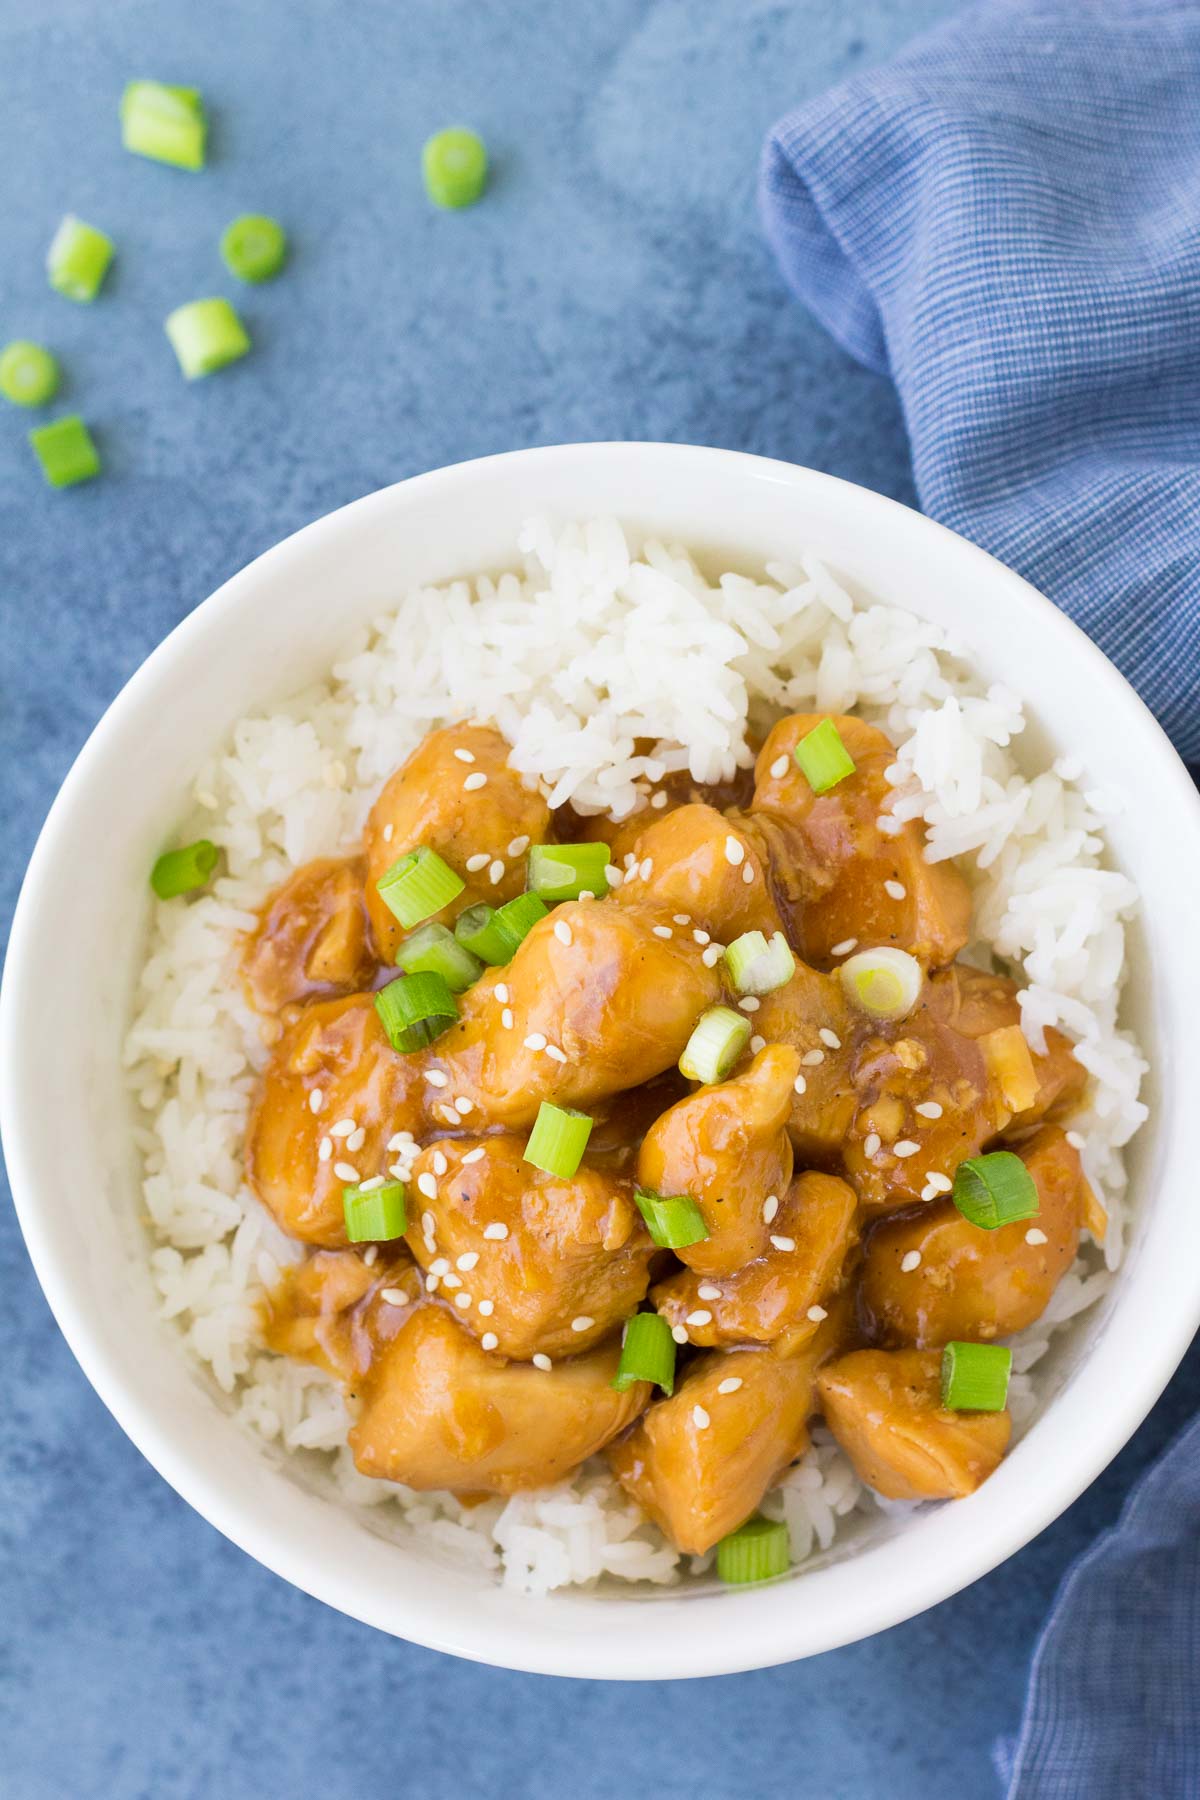 Instant pot orange chicken served over white rice, topped with green onions.